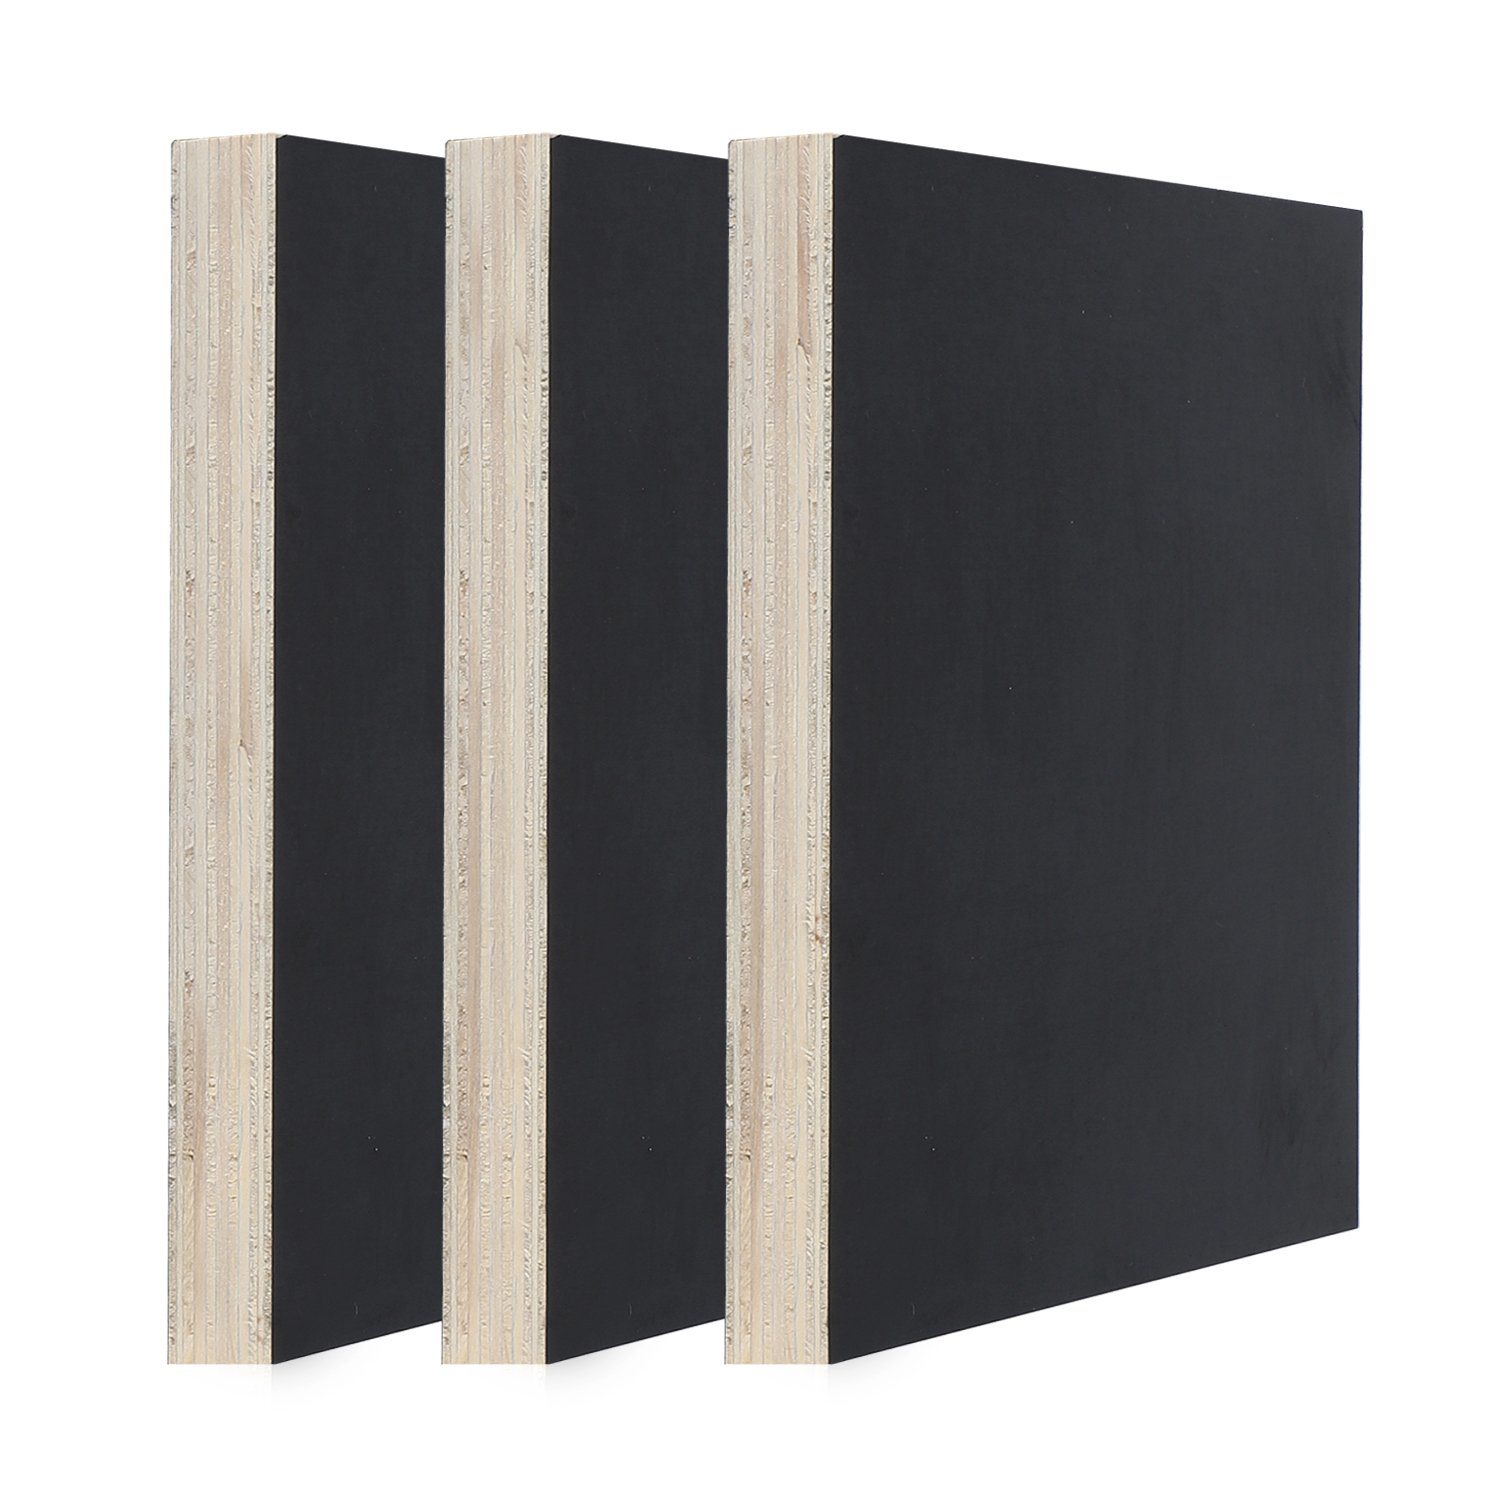 Black Film Faced Plywood for Building Material